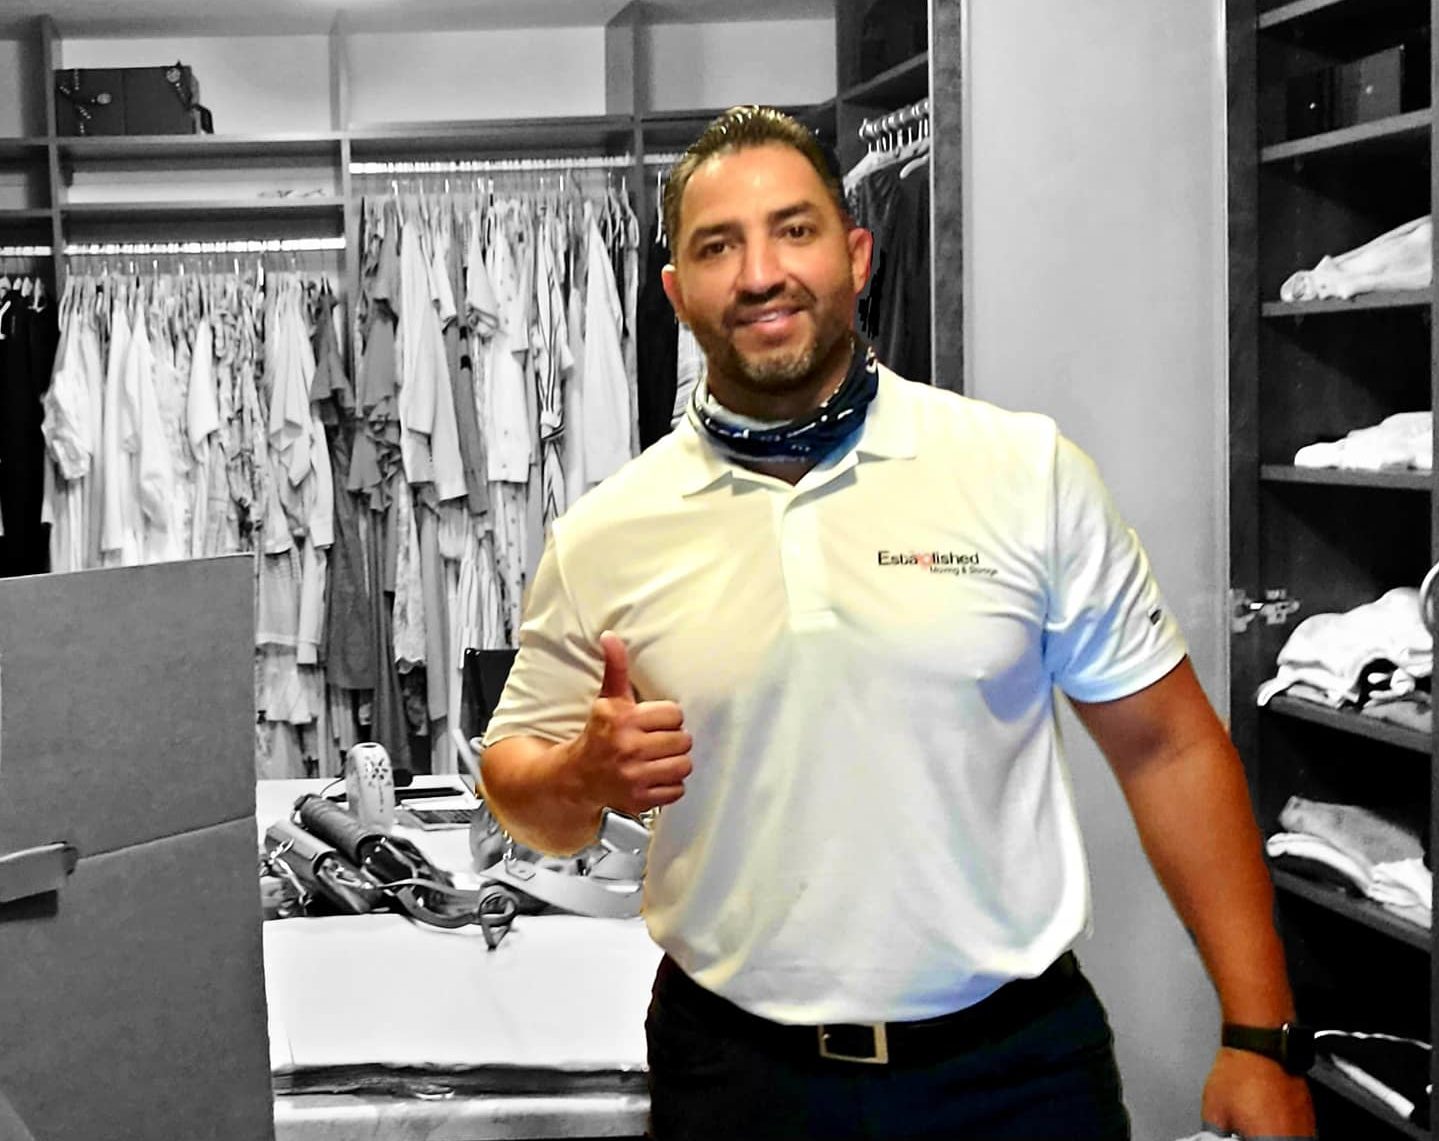 a manager at established moving & storage gives a thumbs up in a closet he's packing